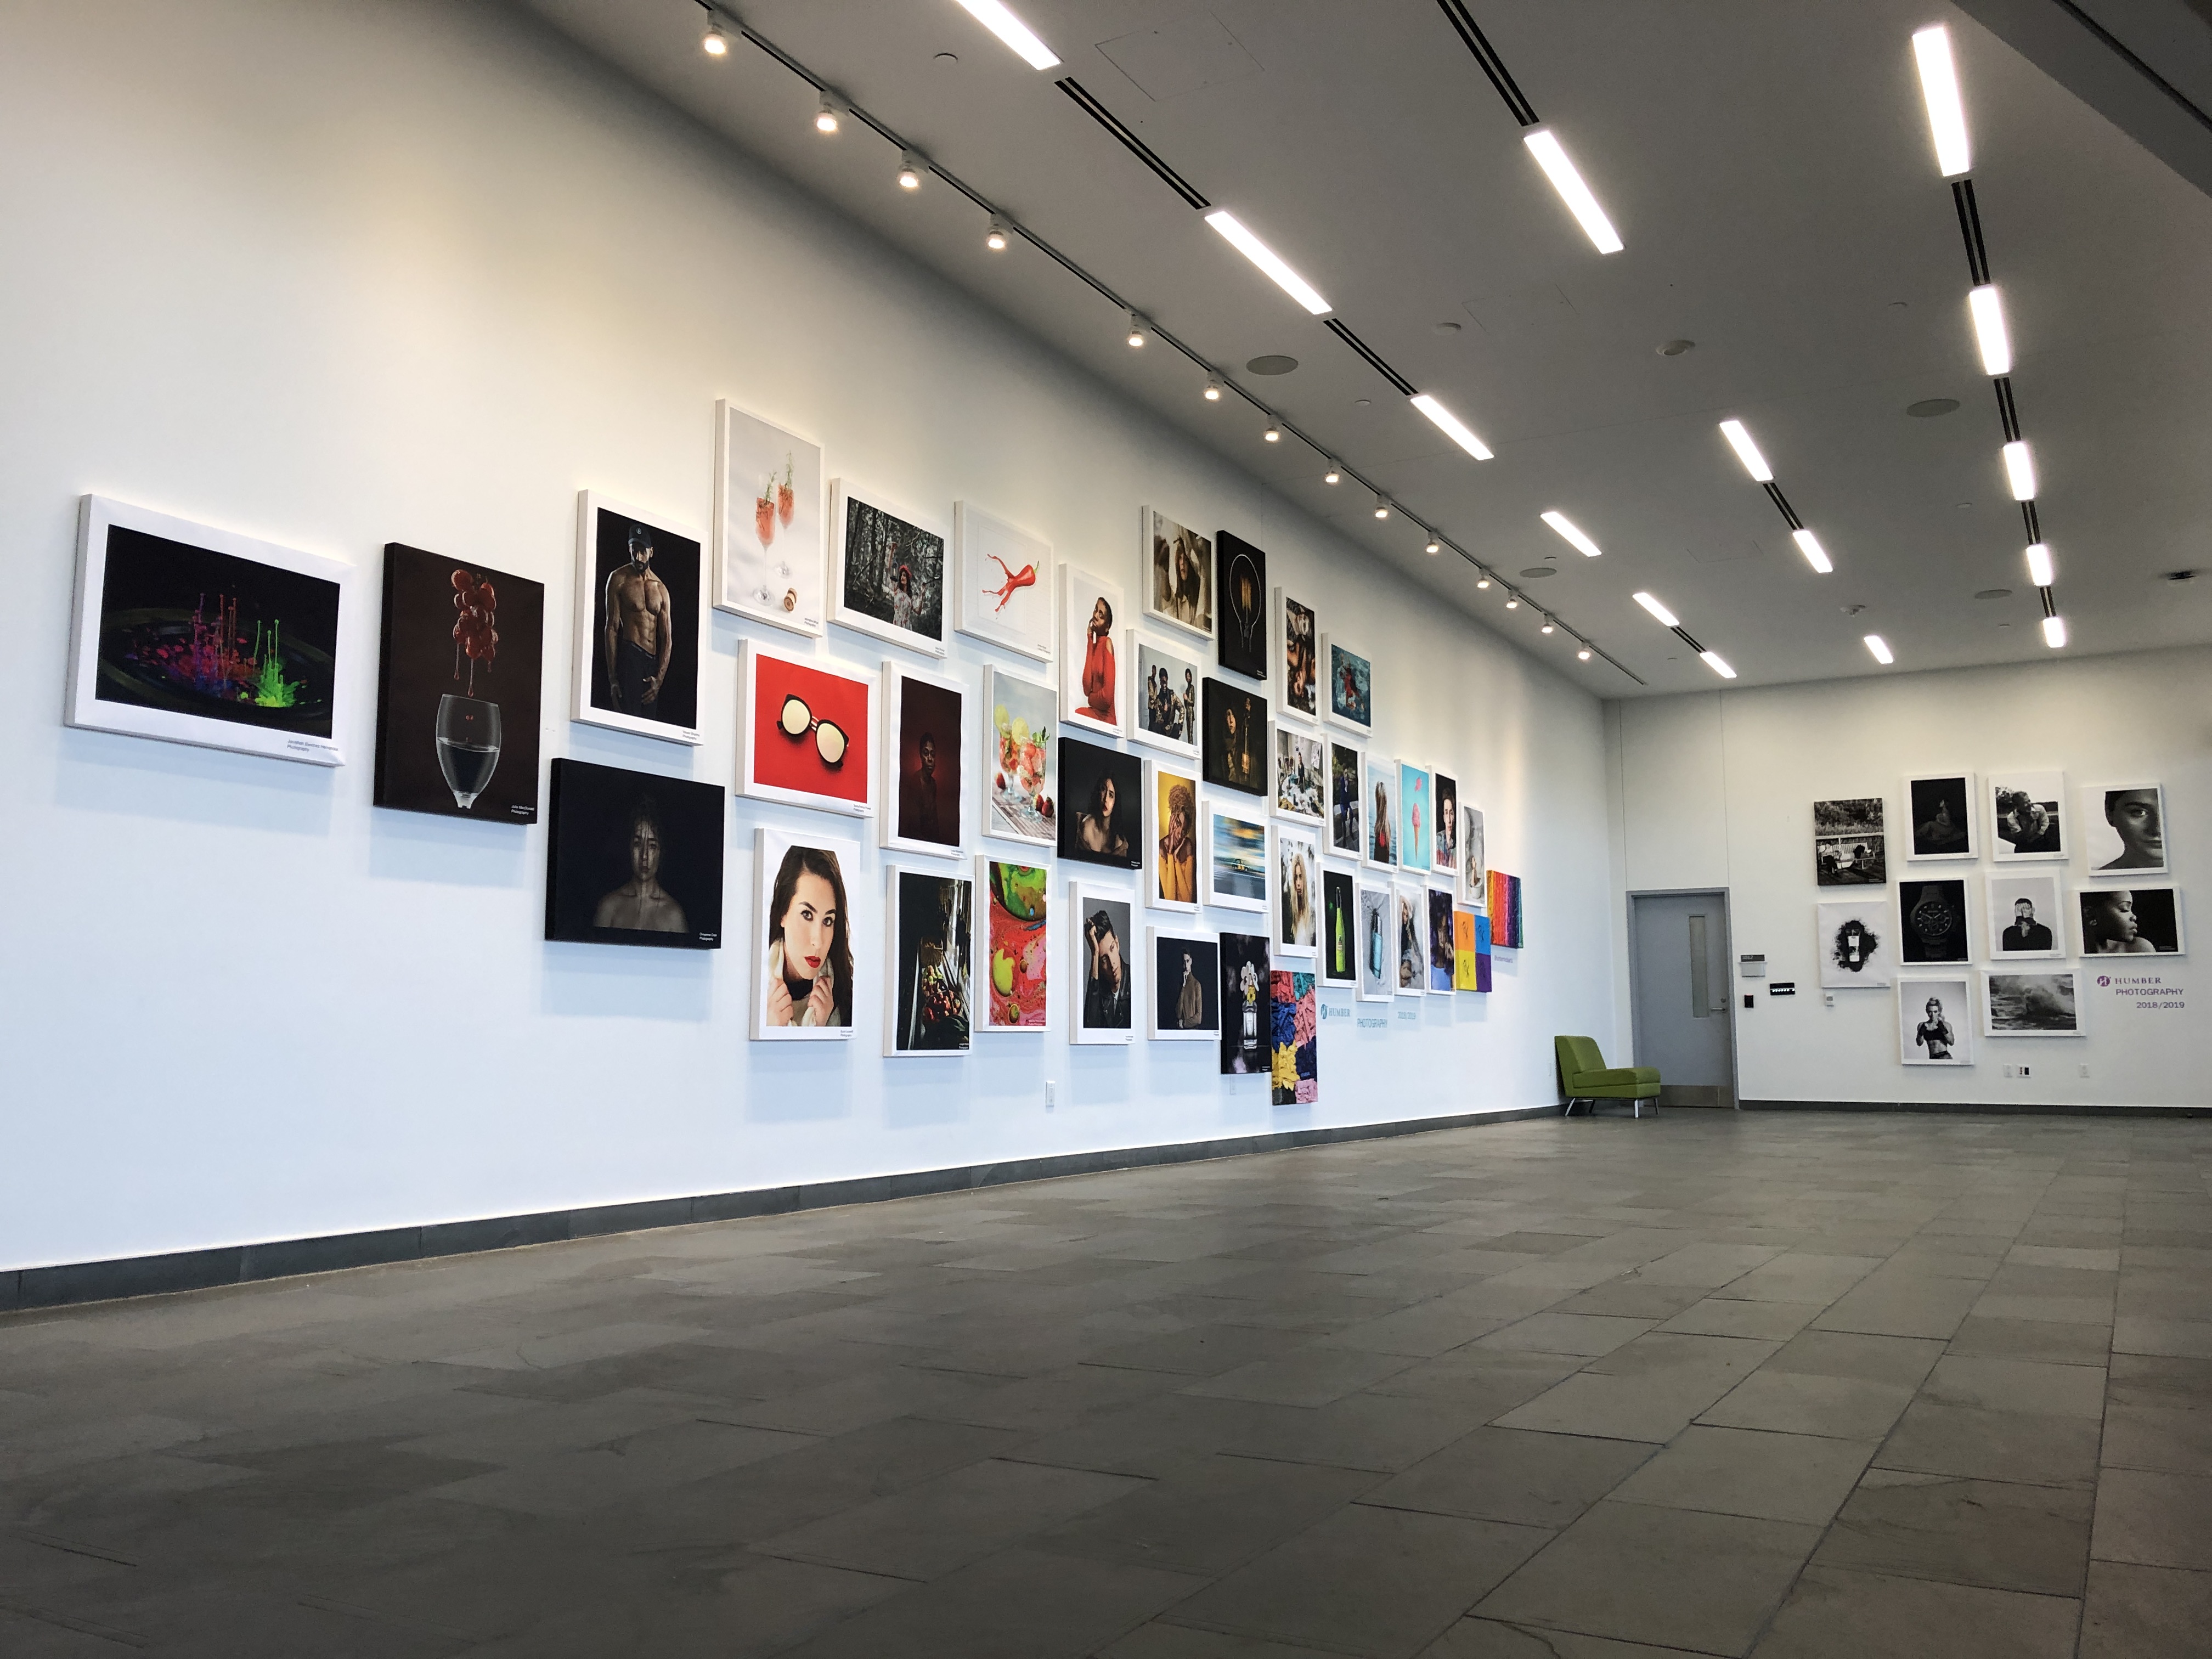 Humber North Campus Art Gallery